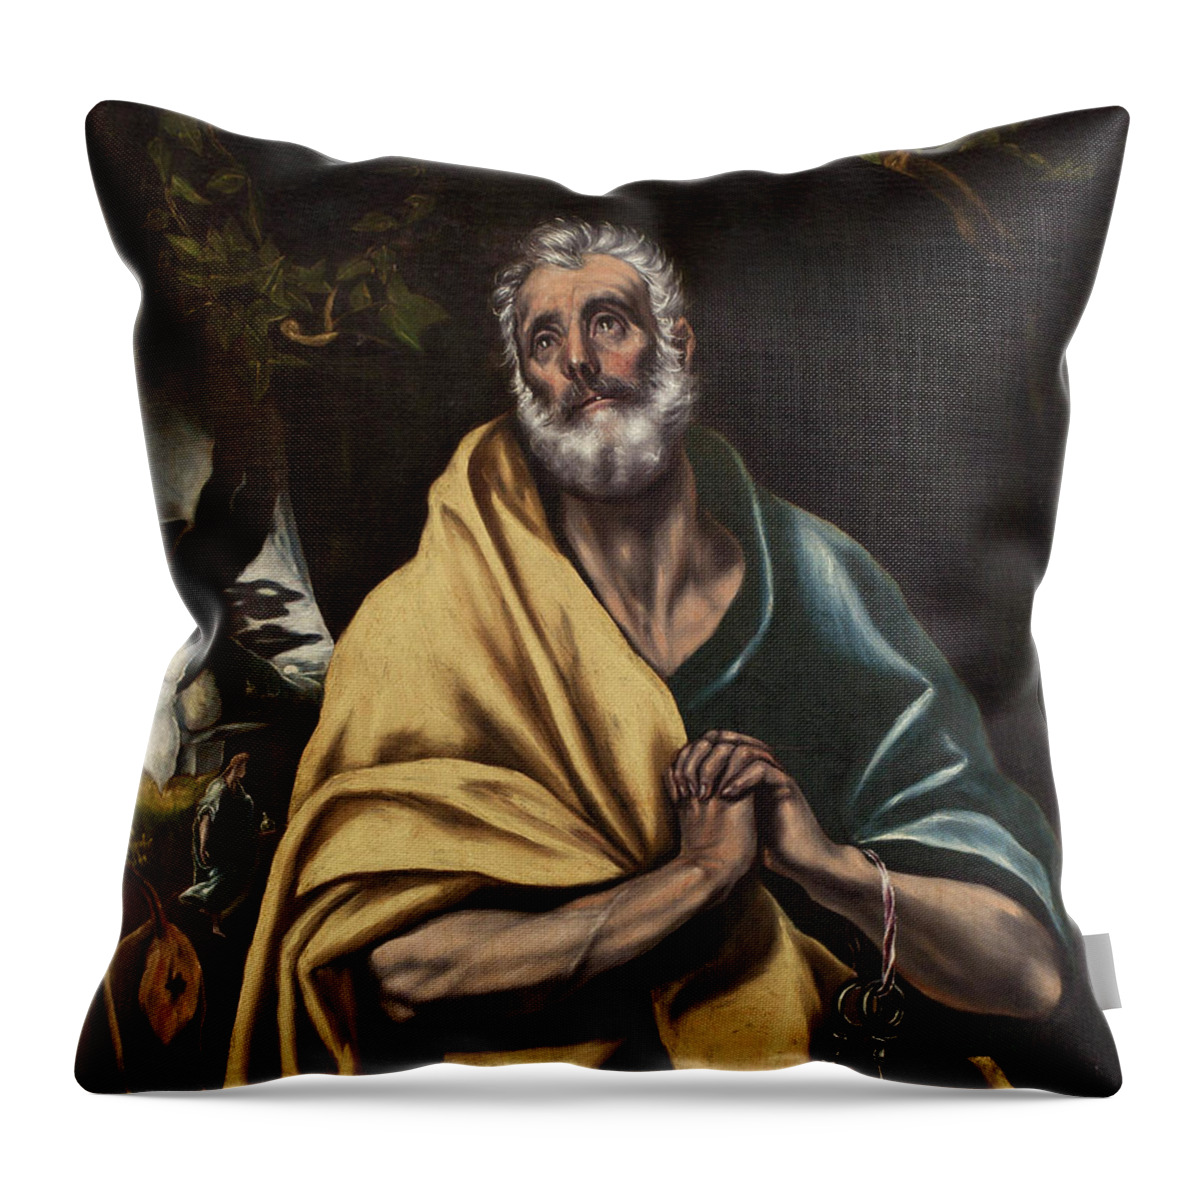 Angel Throw Pillow featuring the painting The tears of Saint Peter #4 by El Greco